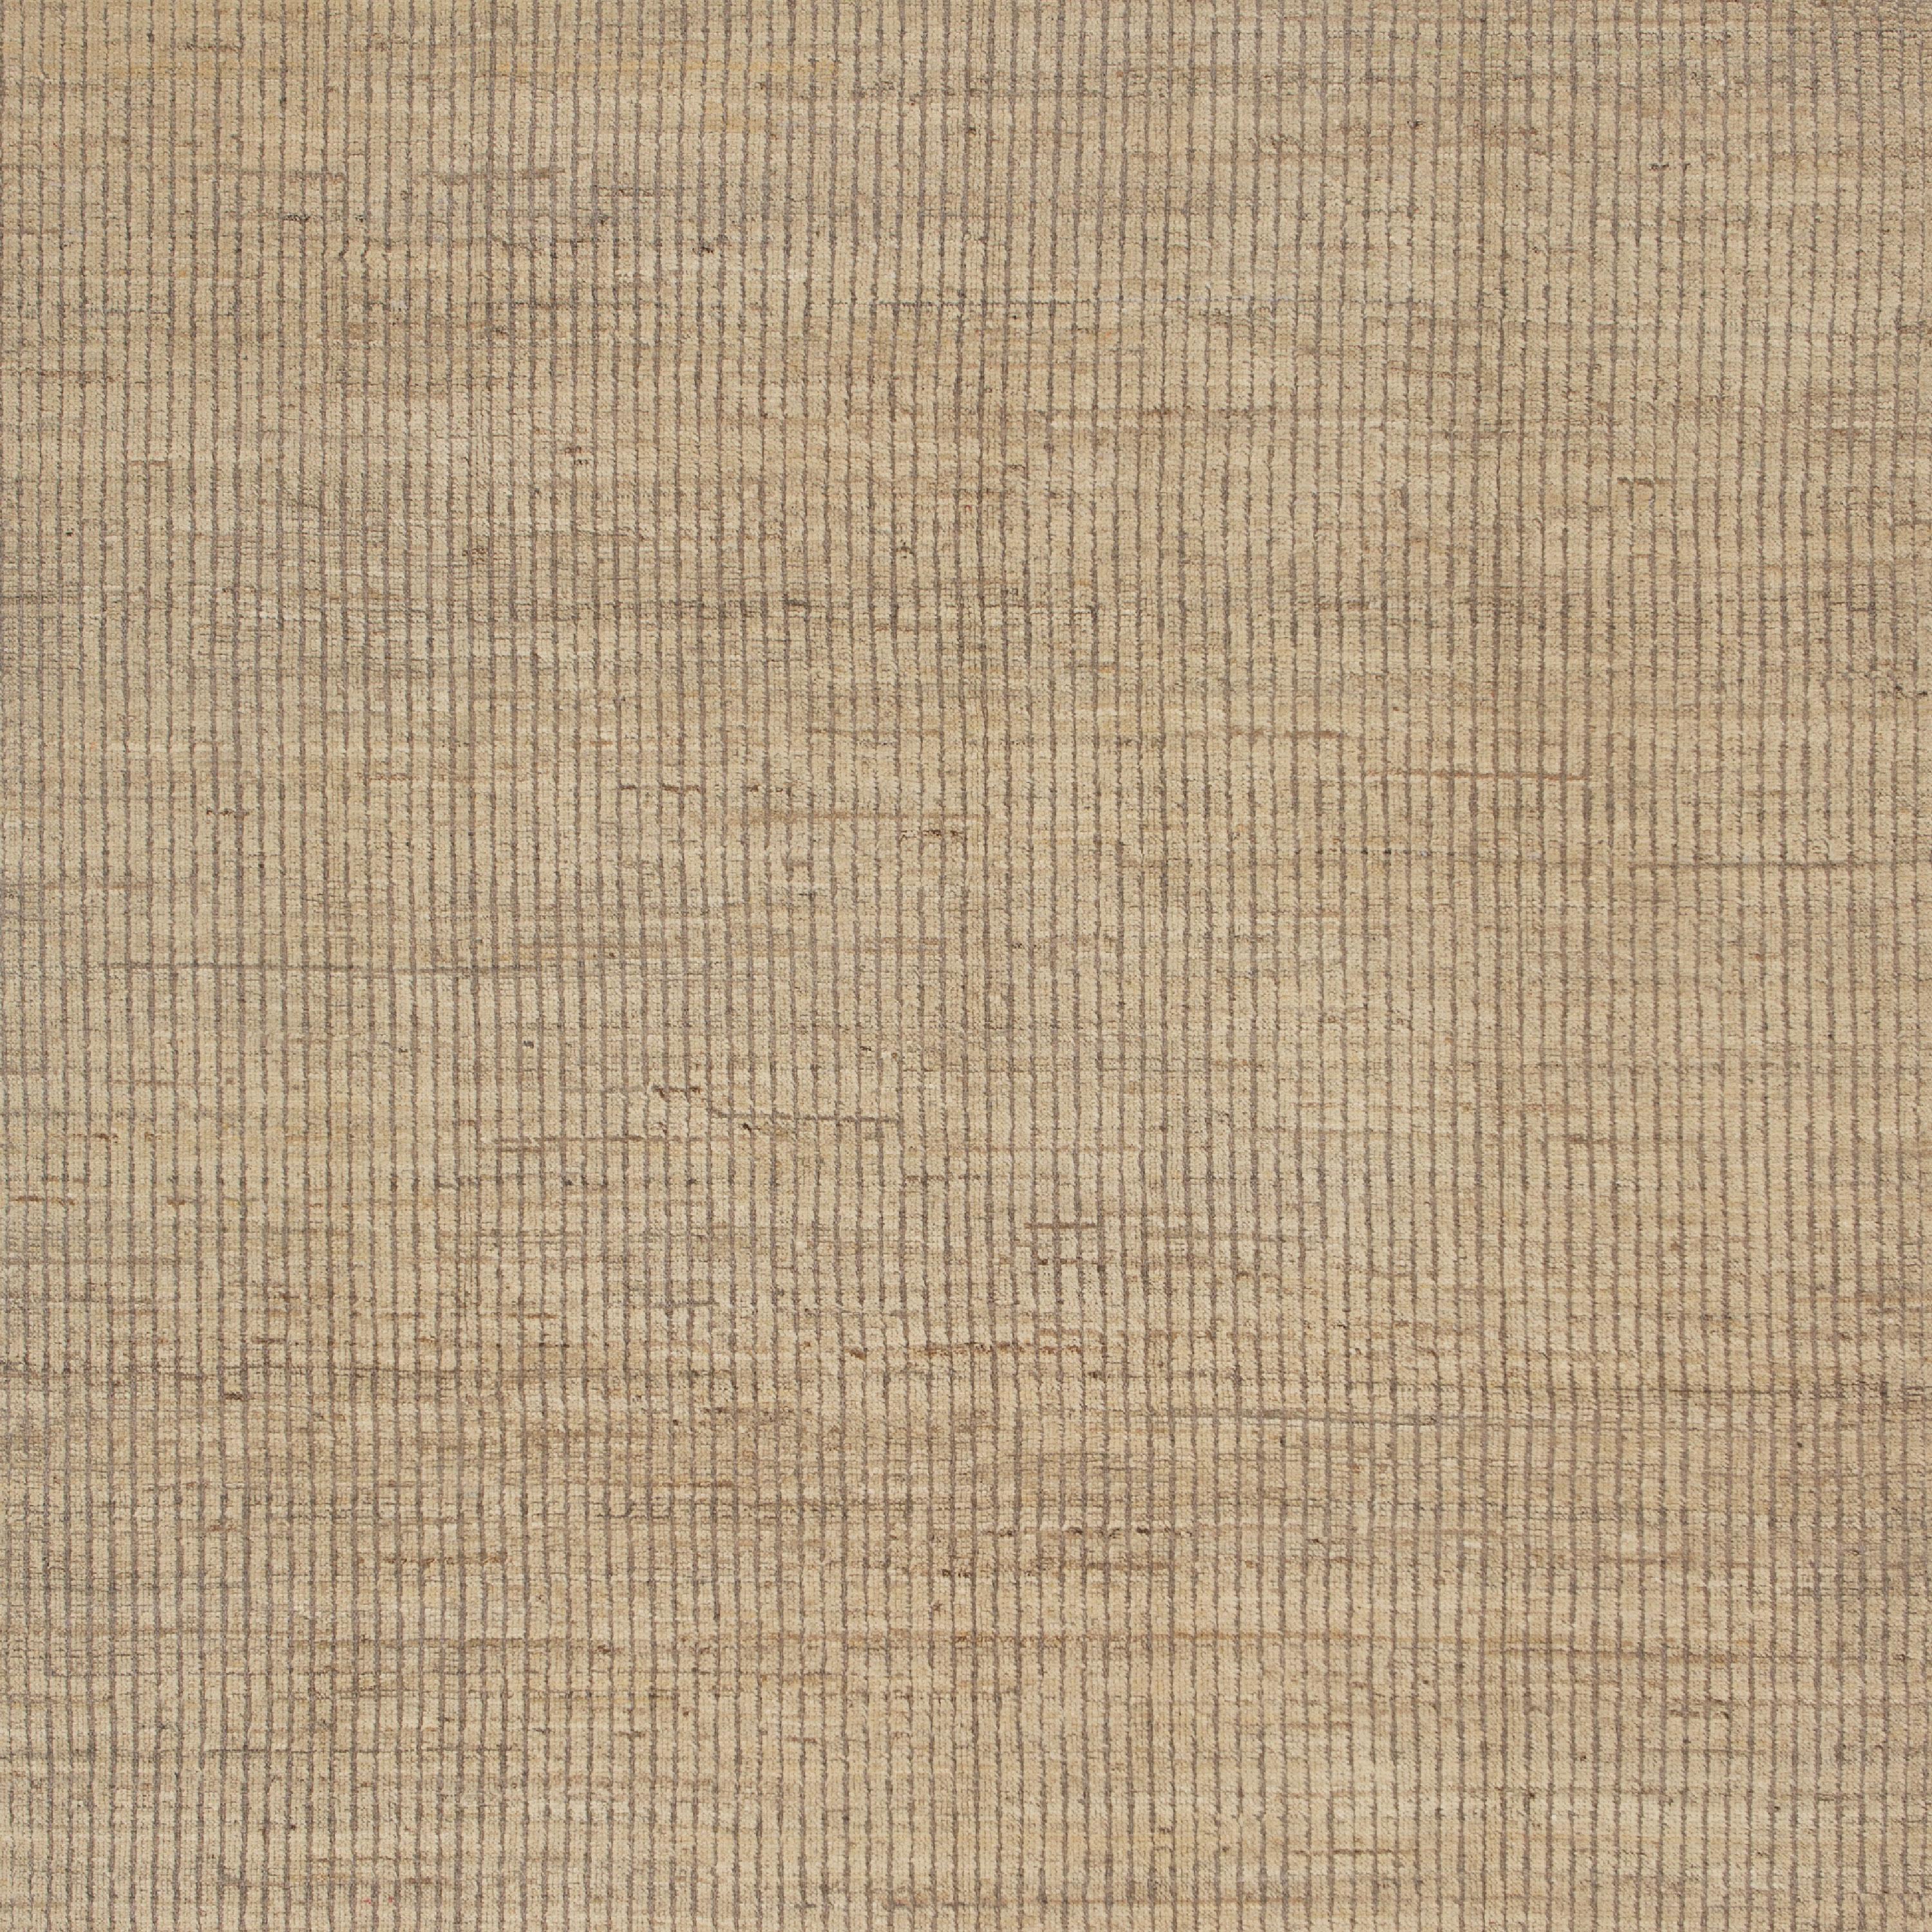 Inspired by the grounding foundations of Earth's natural colors and pure materials, this Zameen Beige Solid Modern Wool Rug - 7'8